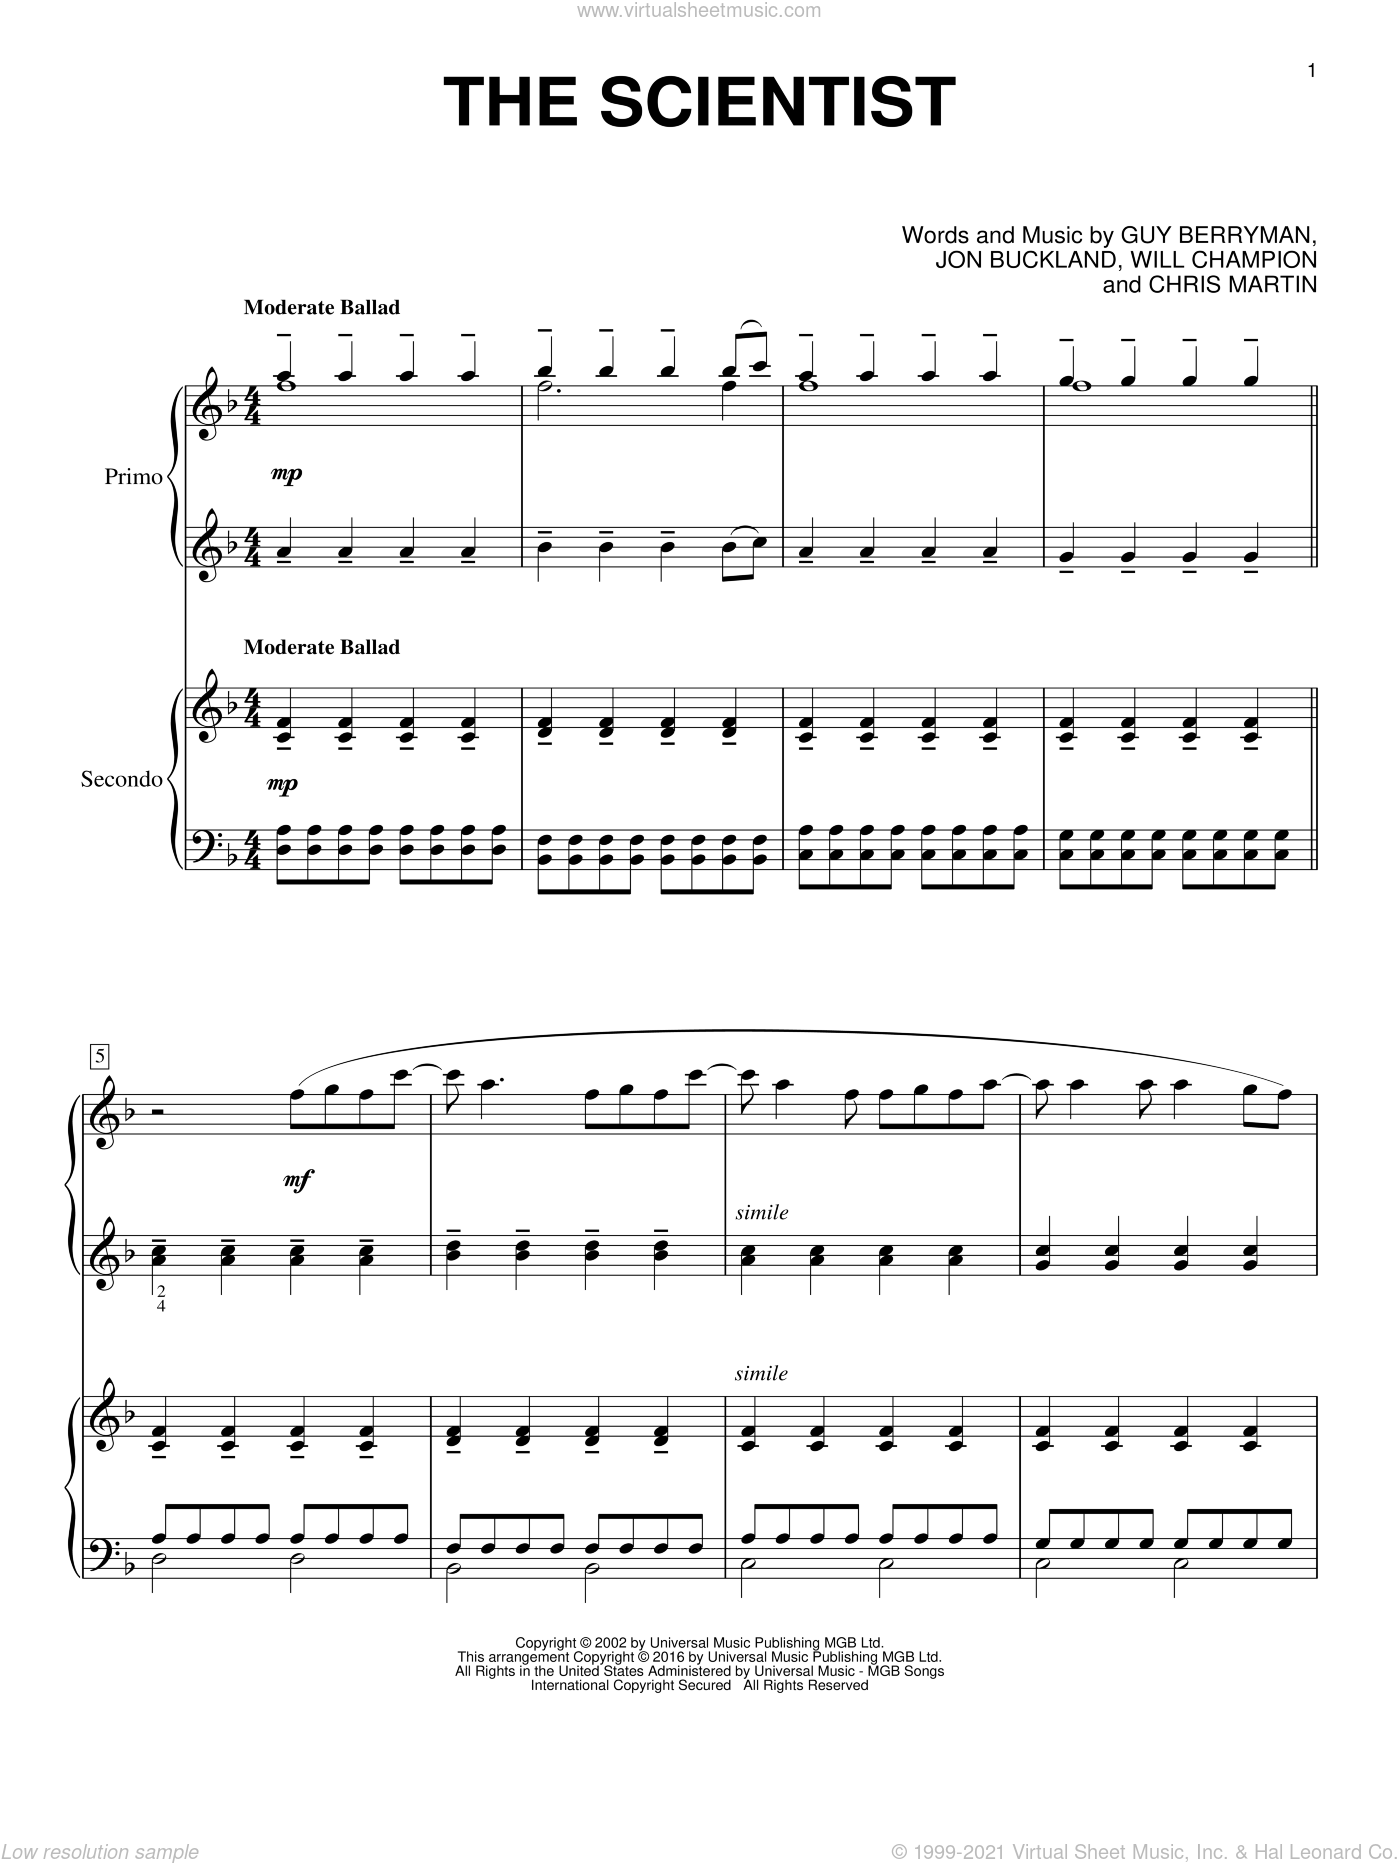 Martin - The Scientist sheet music for piano four hands [PDF]